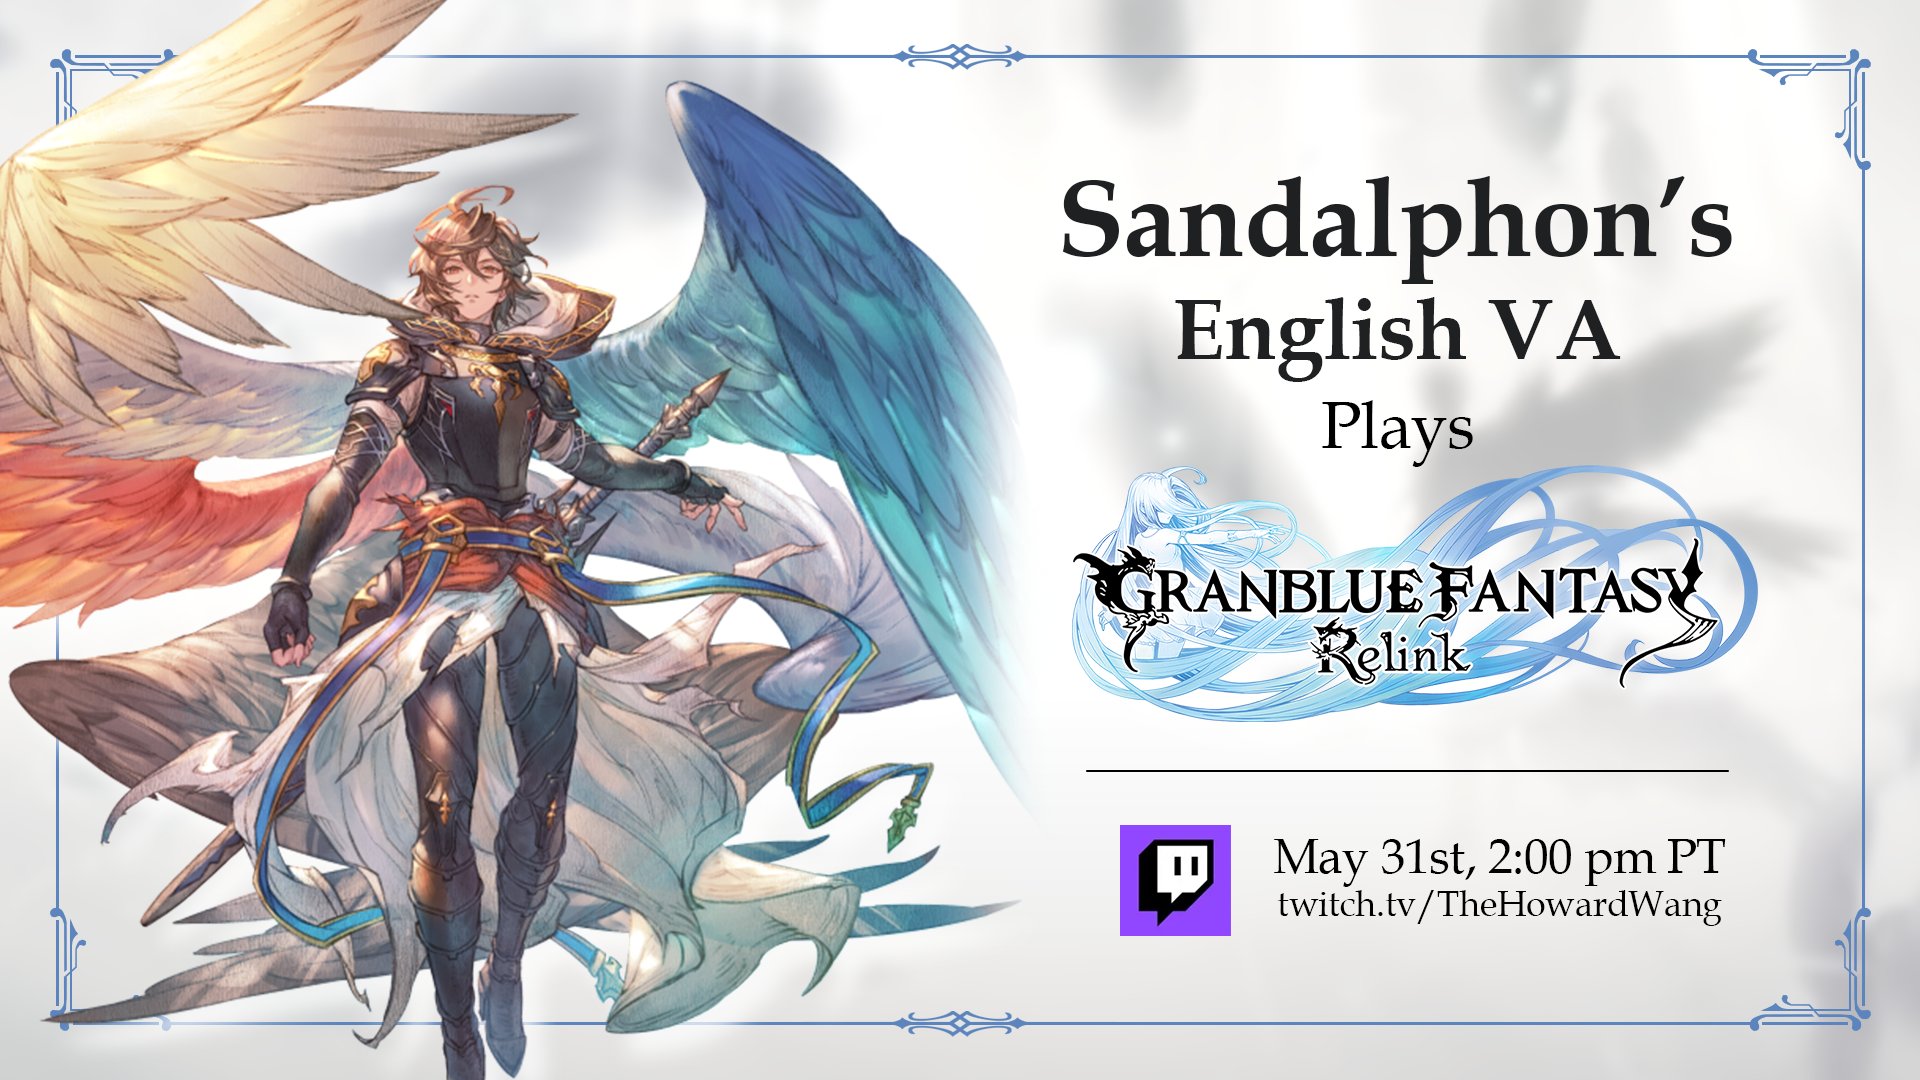 Granblue Fantasy: Relink Gets Version 1.3.0 Update Includes New Character Sandalphon, Photo Mode, and More